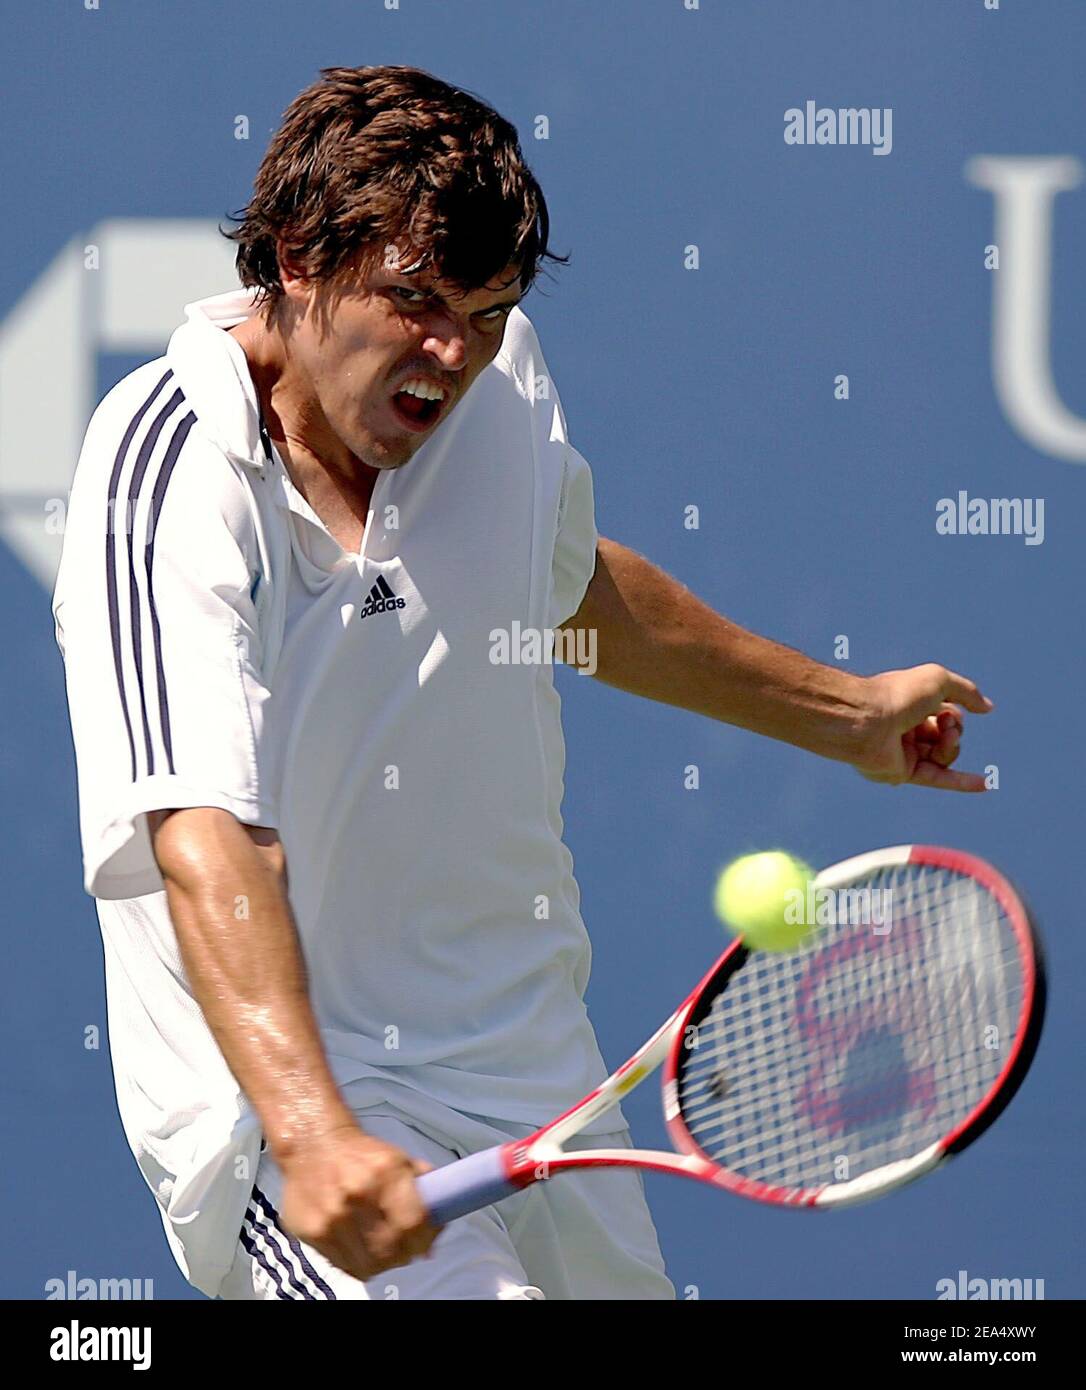 USA's Taylor Dent competes against Spain's Nicolas Almagro during the fifth day of competition at the 2005 US Open tennis tournament in Flushing Meadows, New York on September 2, 2005. Photo by William Gratz/ABACAPRESS.COM Stock Photo